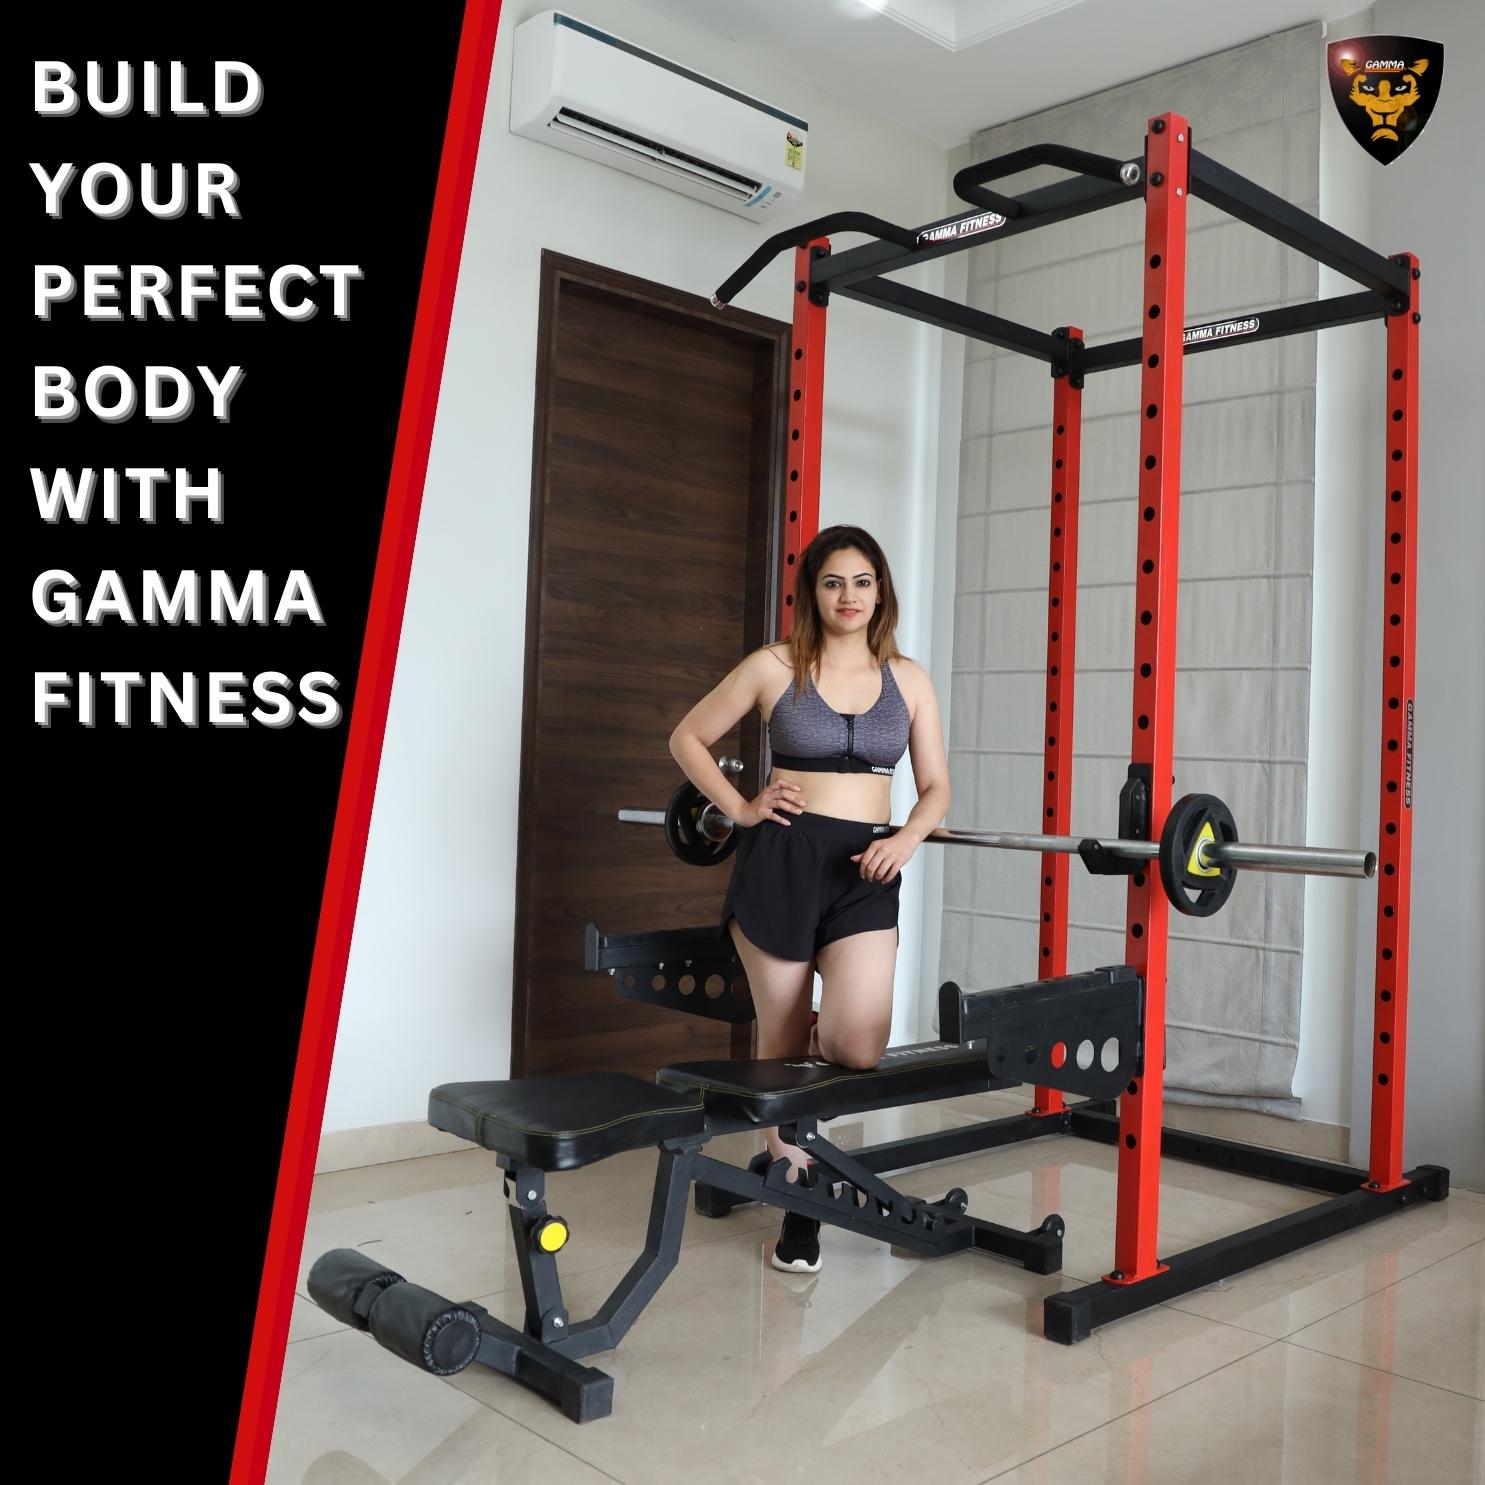 Power Squat Rack PR-04 Lx Commercial Made With Latest Laser Cut Technology For Commercial Gym or Home Gym Setup